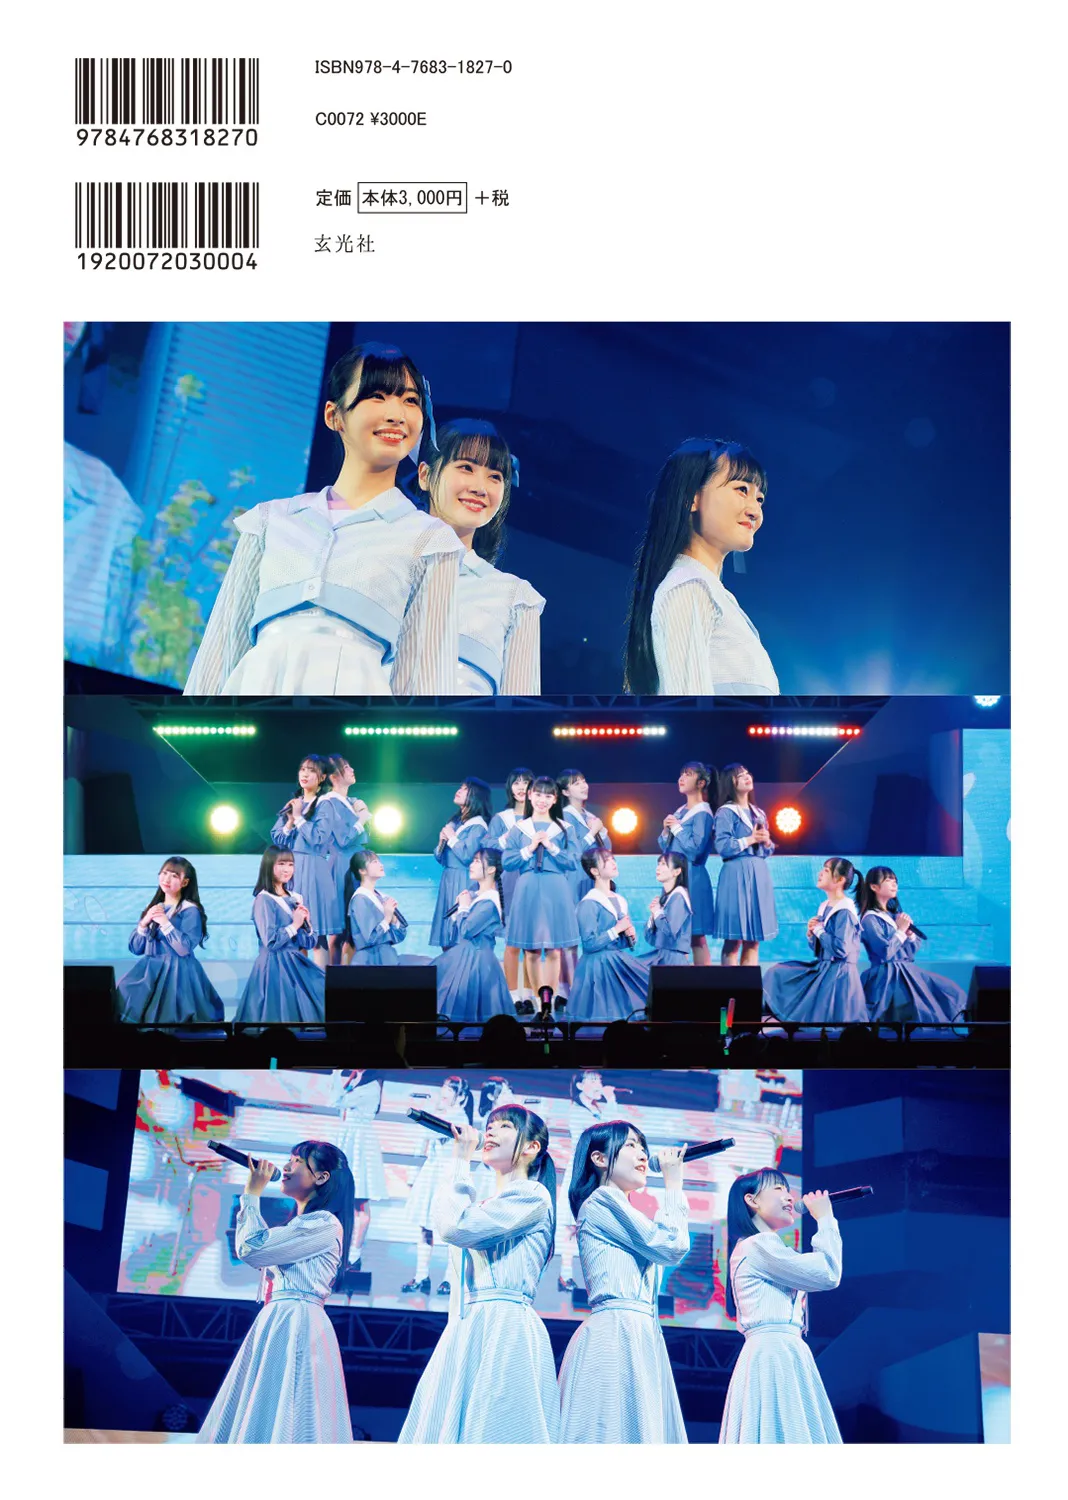 「STU48 6th Anniversary Concert Documentary Book-届け、あなたのもとへ-」裏表紙